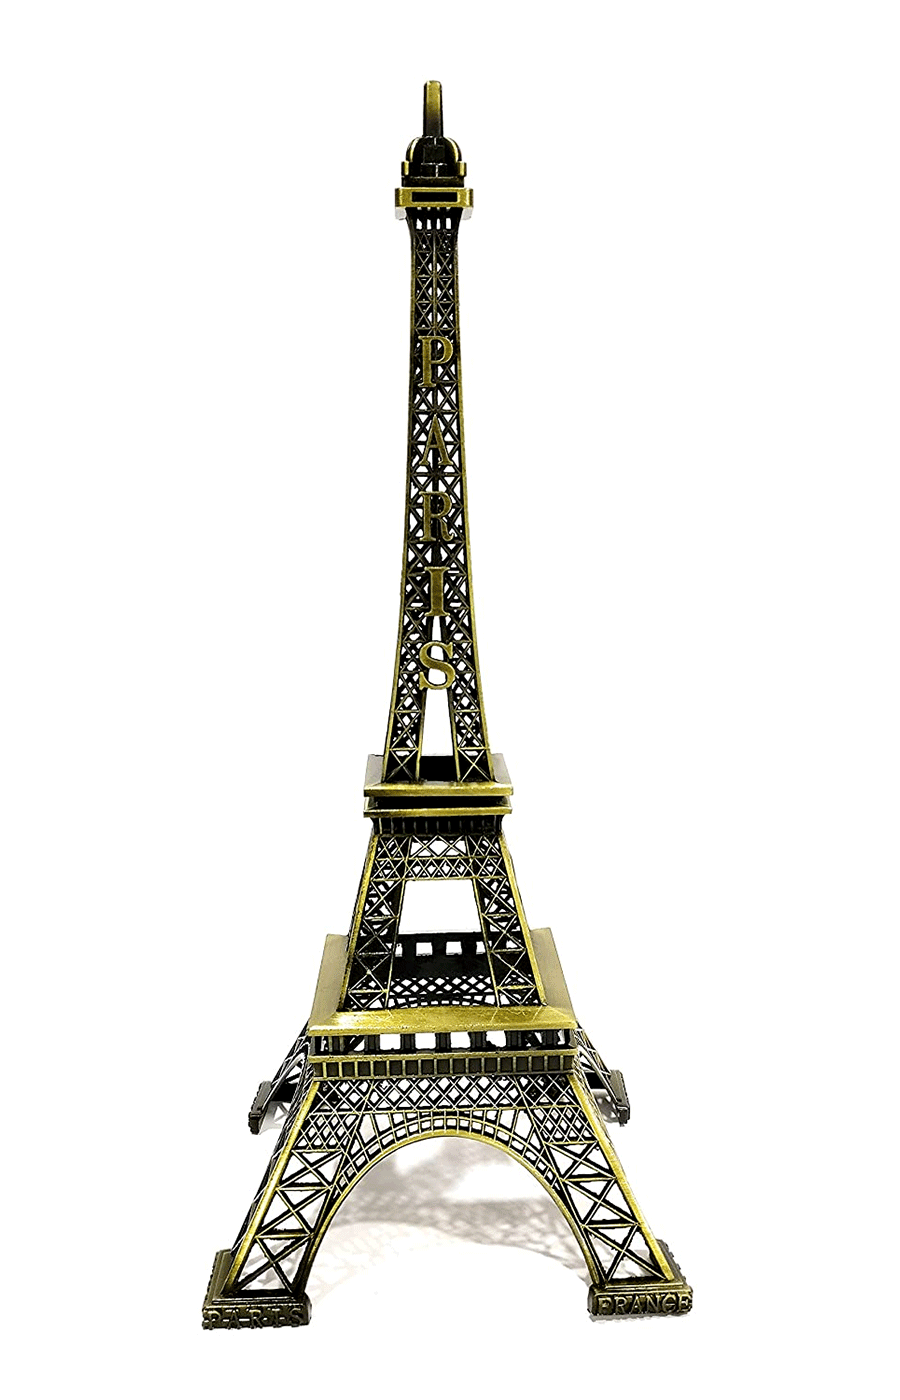 FunkyTradition 13 cm Tall Eiffel Tower Statue Metal Showpiece | Birthday and Home Office Decor 5" Tall